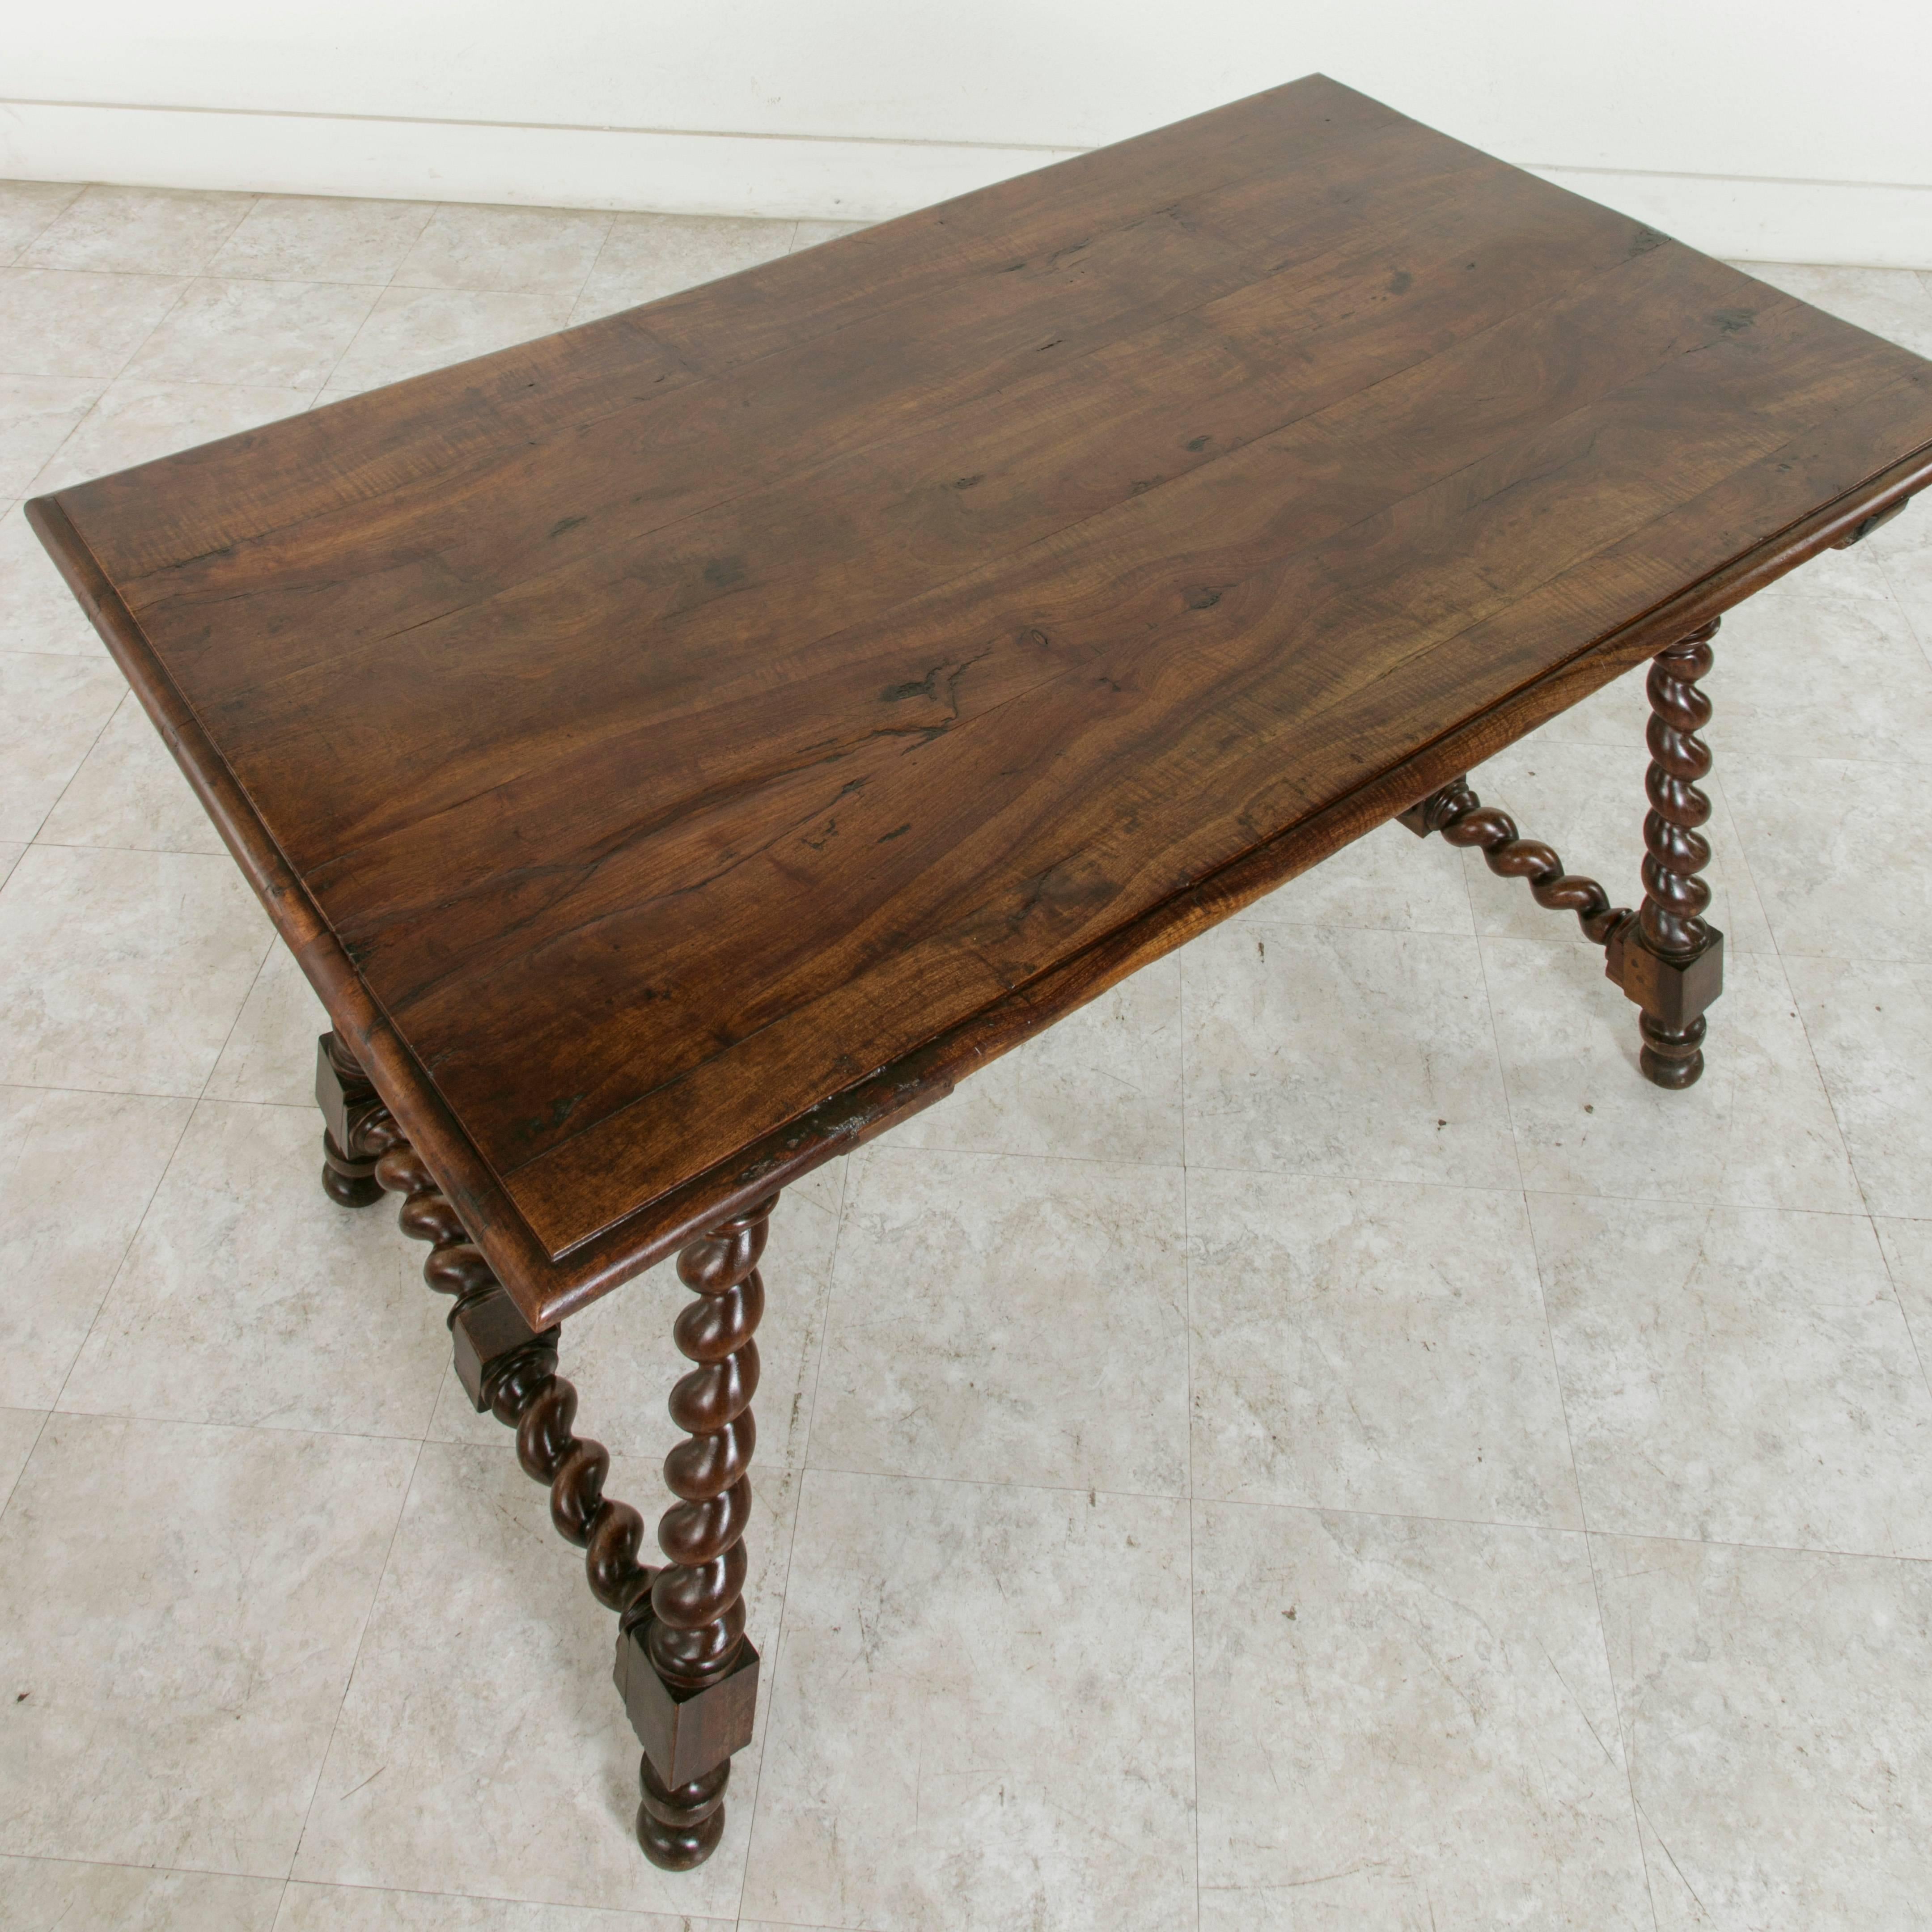 French 19th Century Spanish Renaissance Style Walnut Table with Forged Iron Stretcher